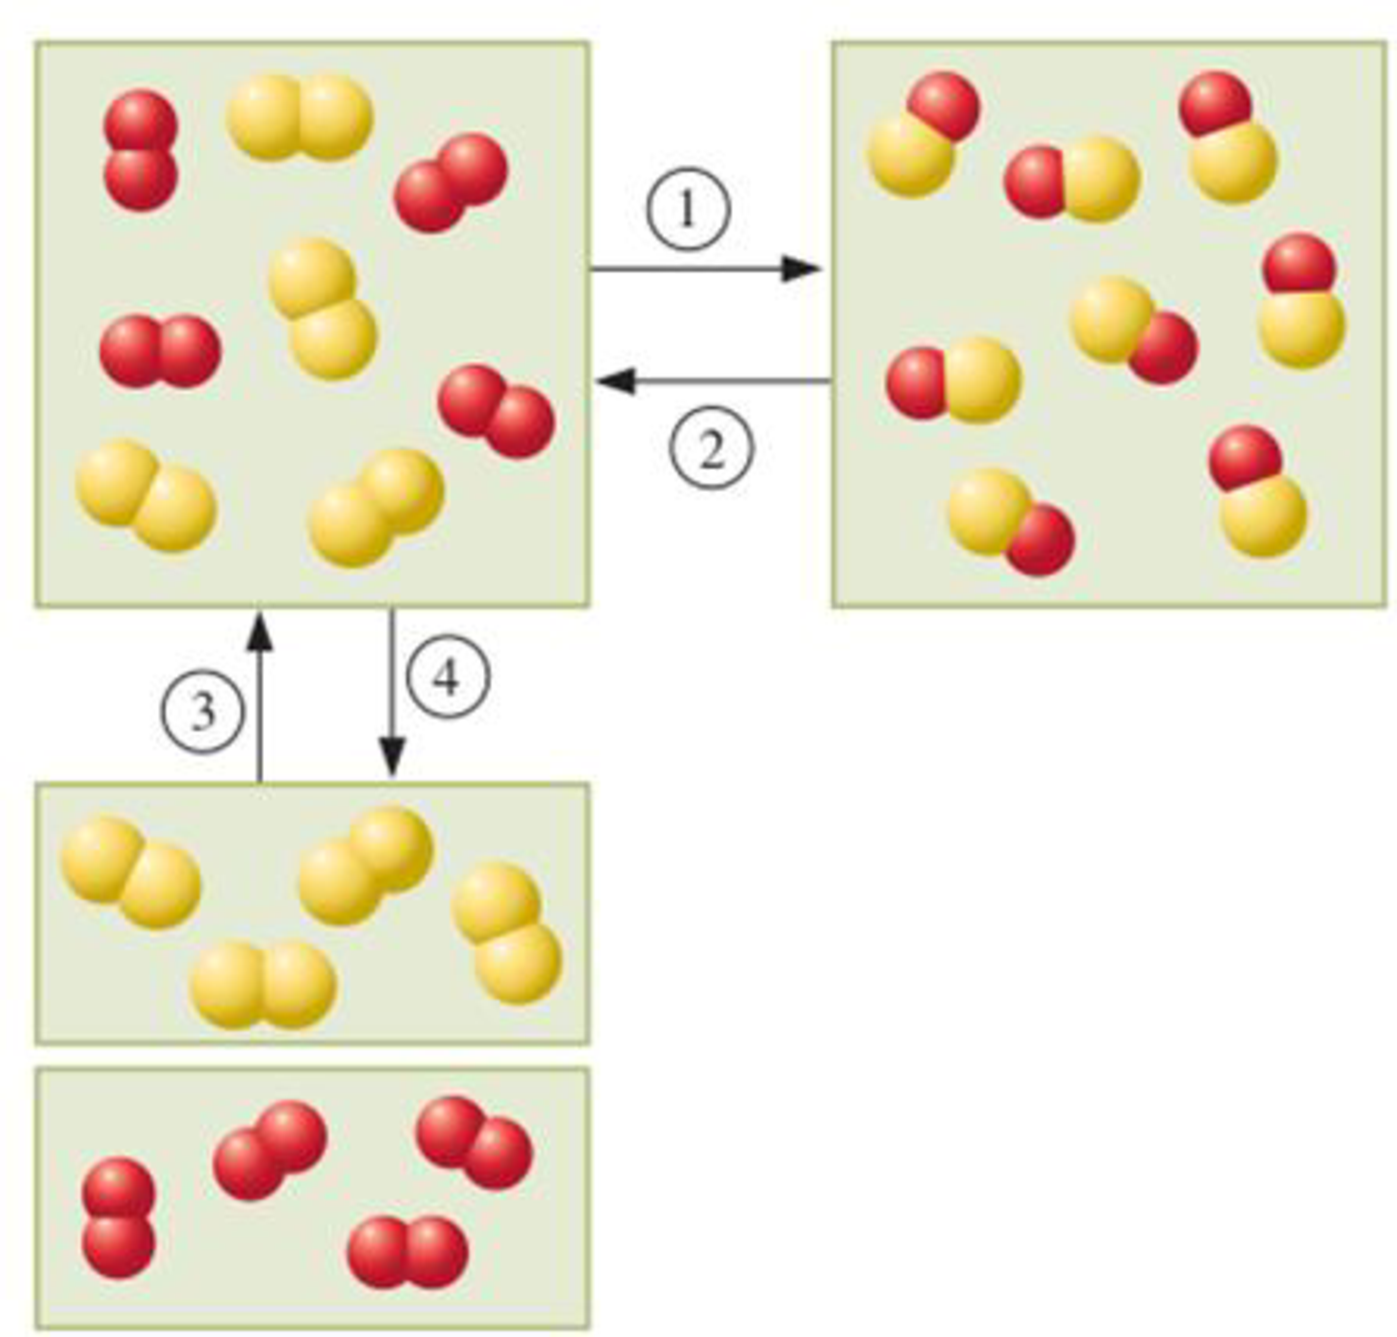 Chapter 1, Problem 1.71EP, In the following diagram, the different colored spheres represent atoms of different elements. Four 